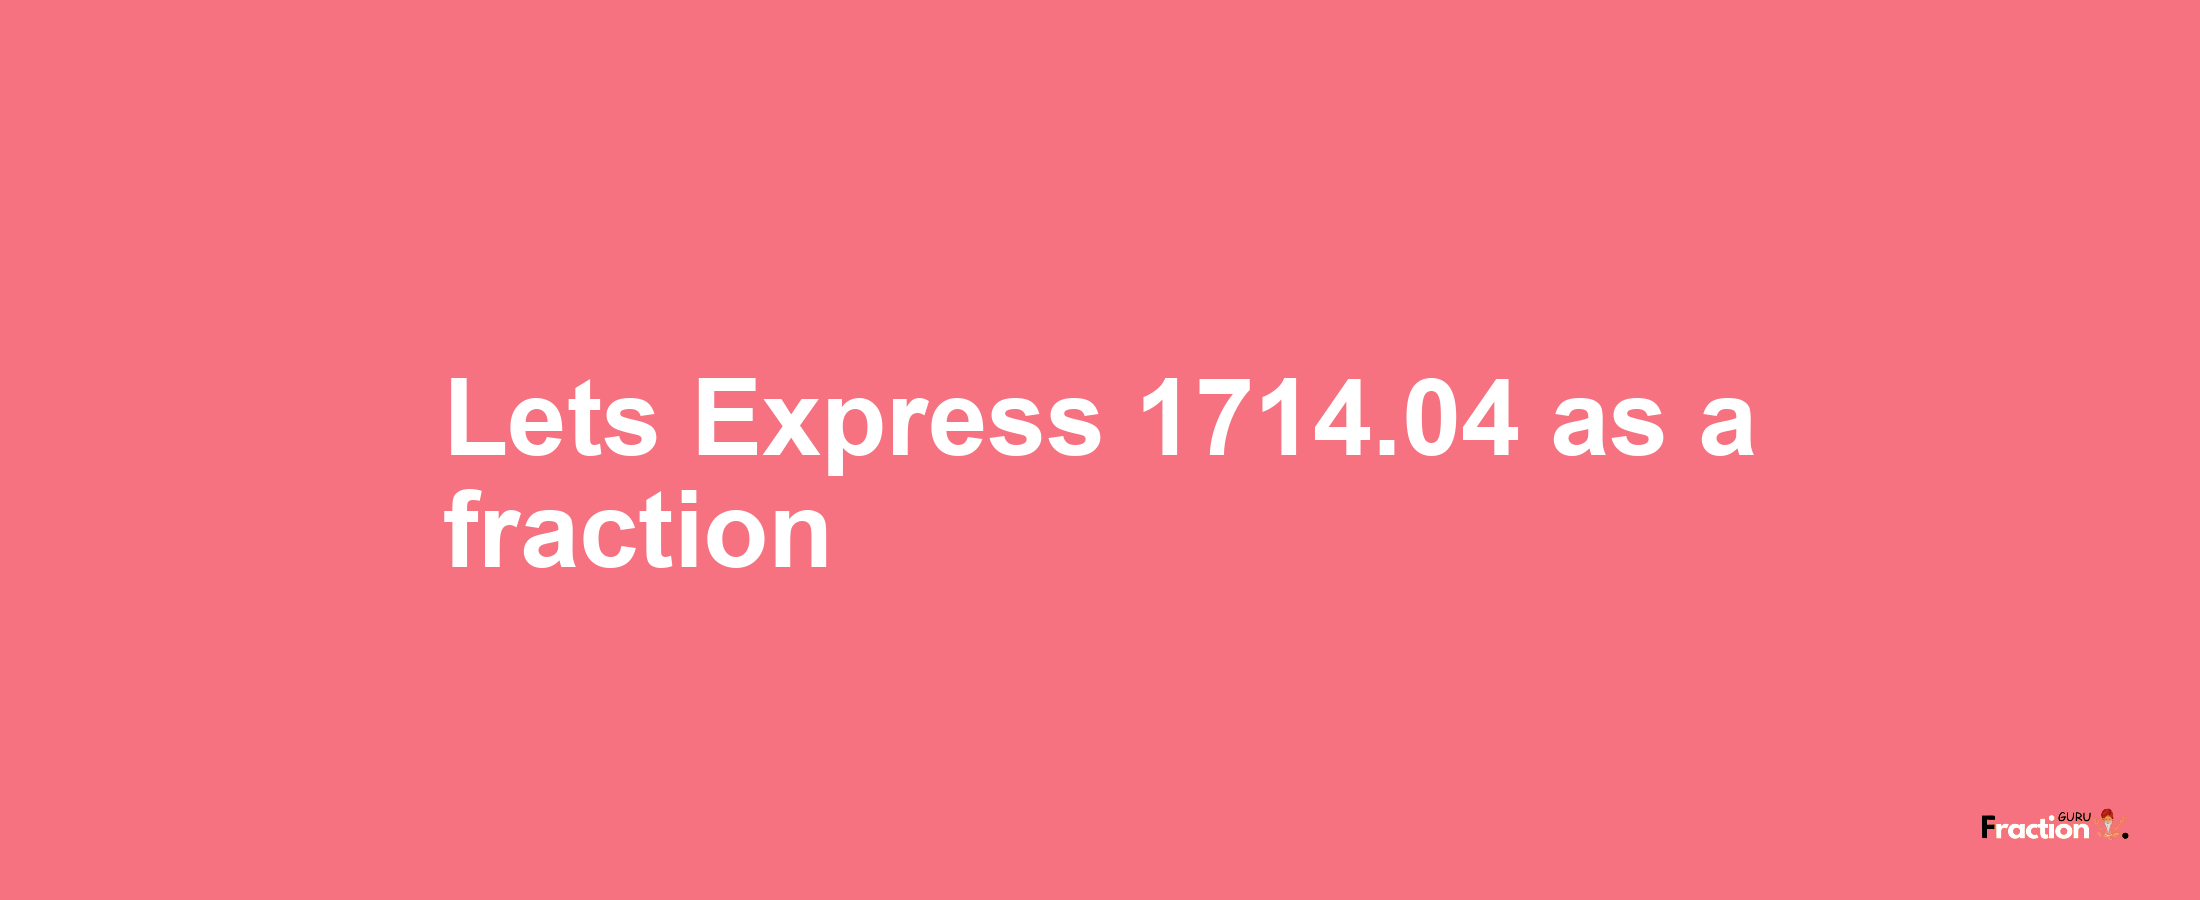 Lets Express 1714.04 as afraction